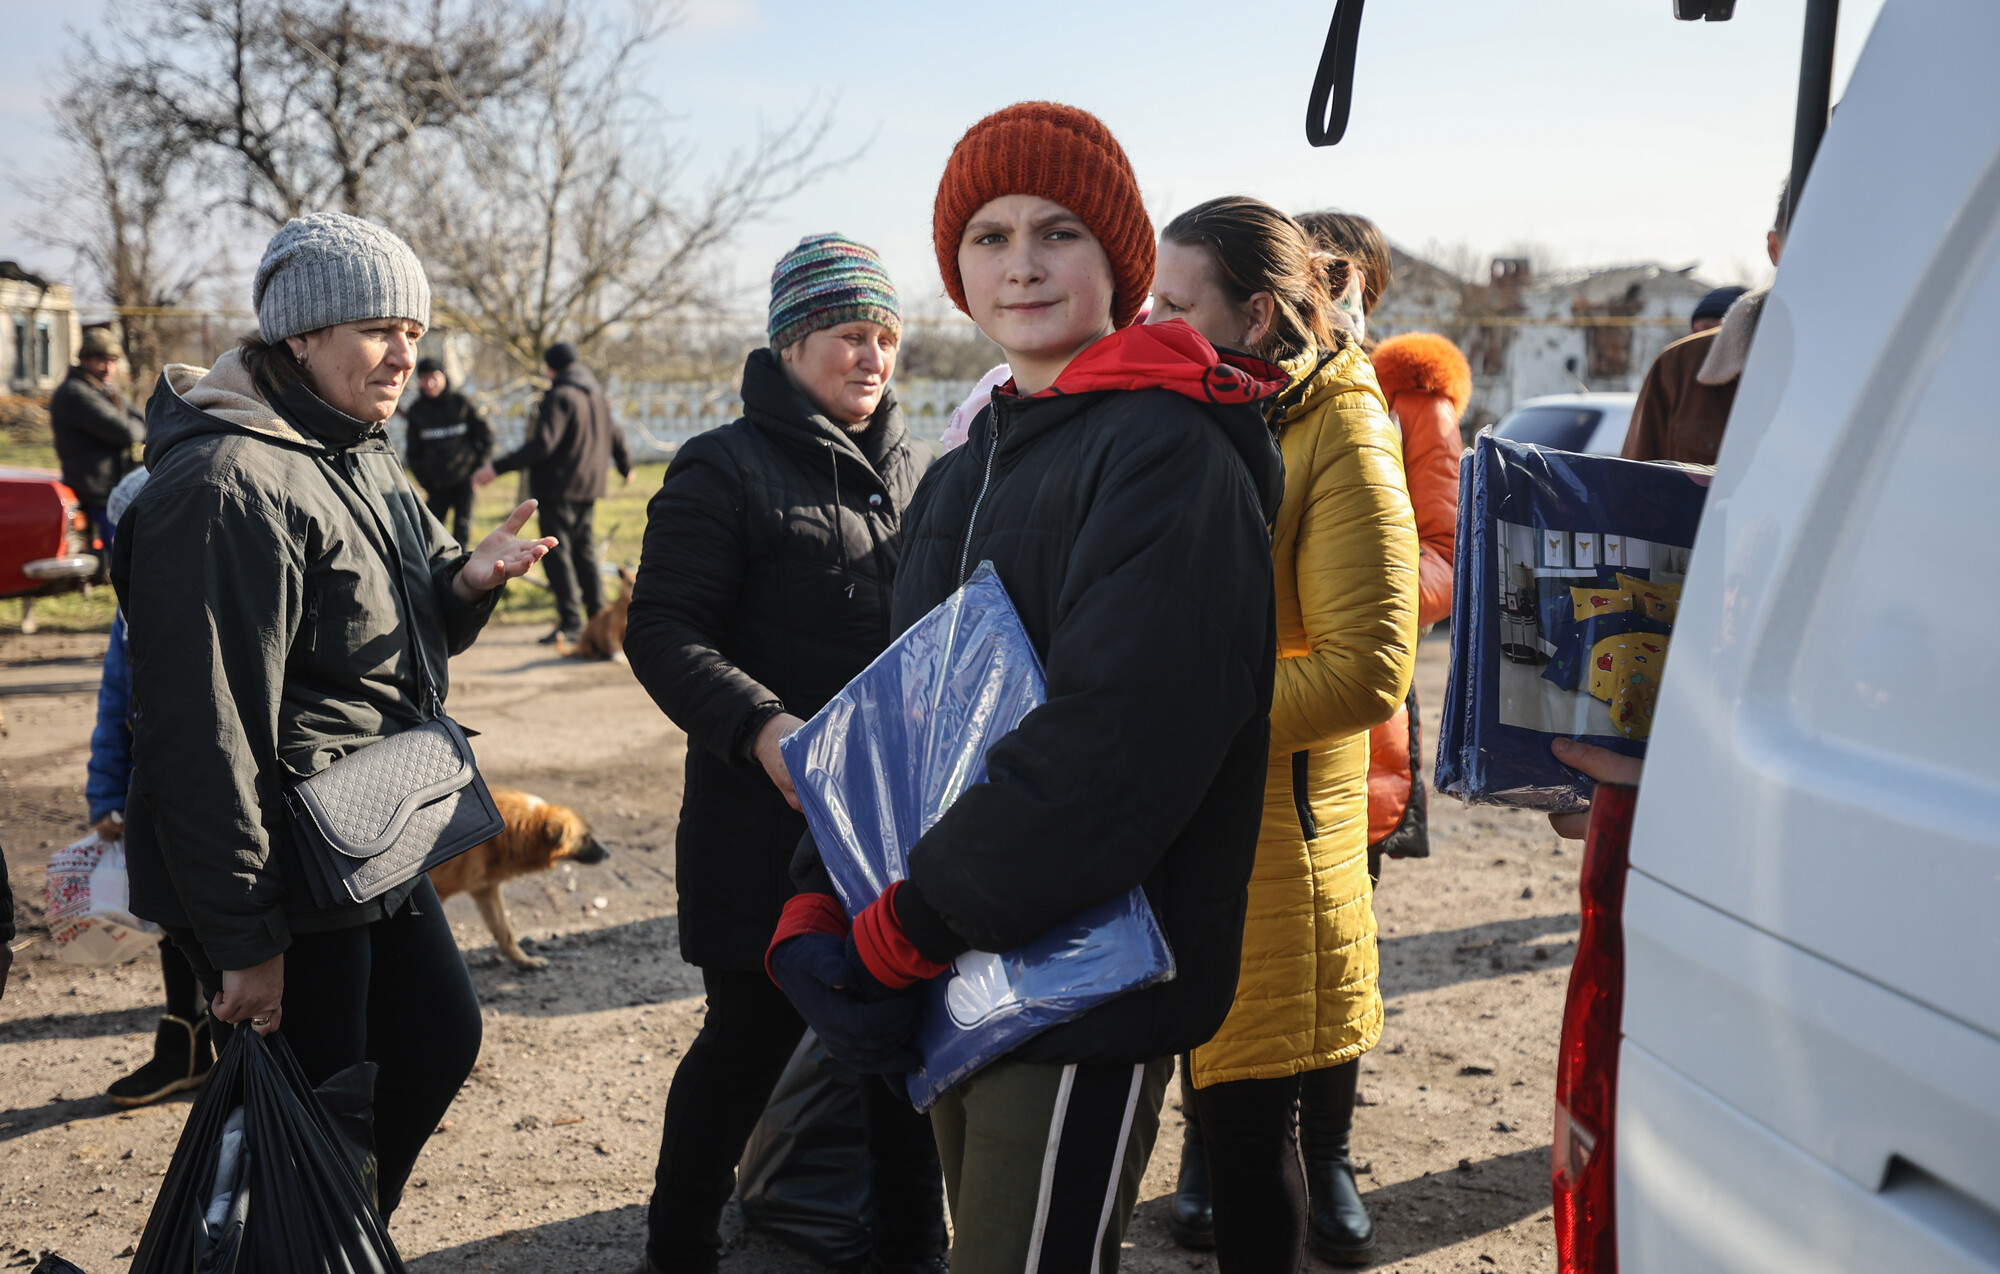 A young person in Ukraine carrying bedding they received from MCC